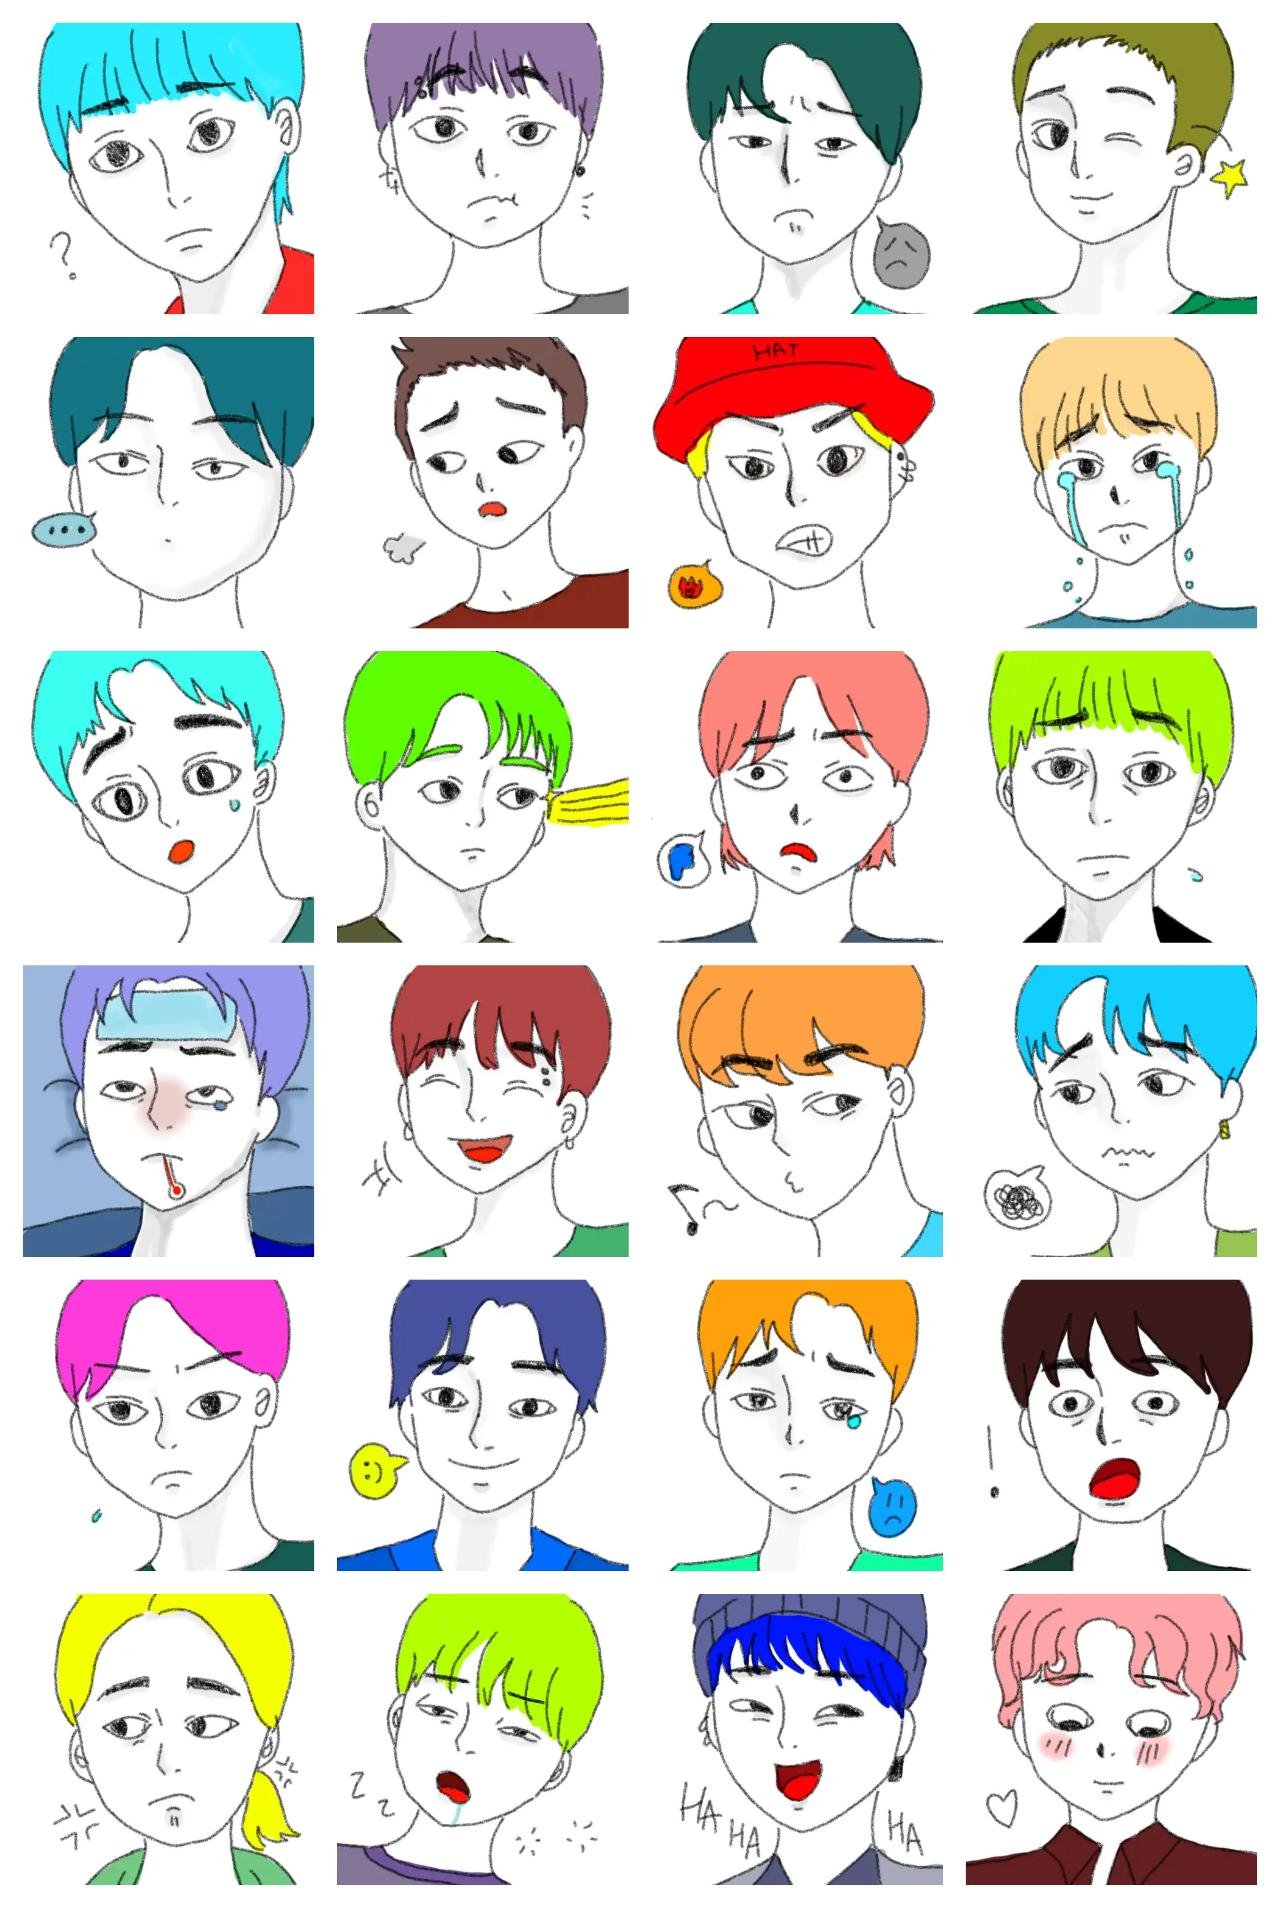 Facial expression People sticker pack for Whatsapp, Telegram, Signal, and others chatting and message apps